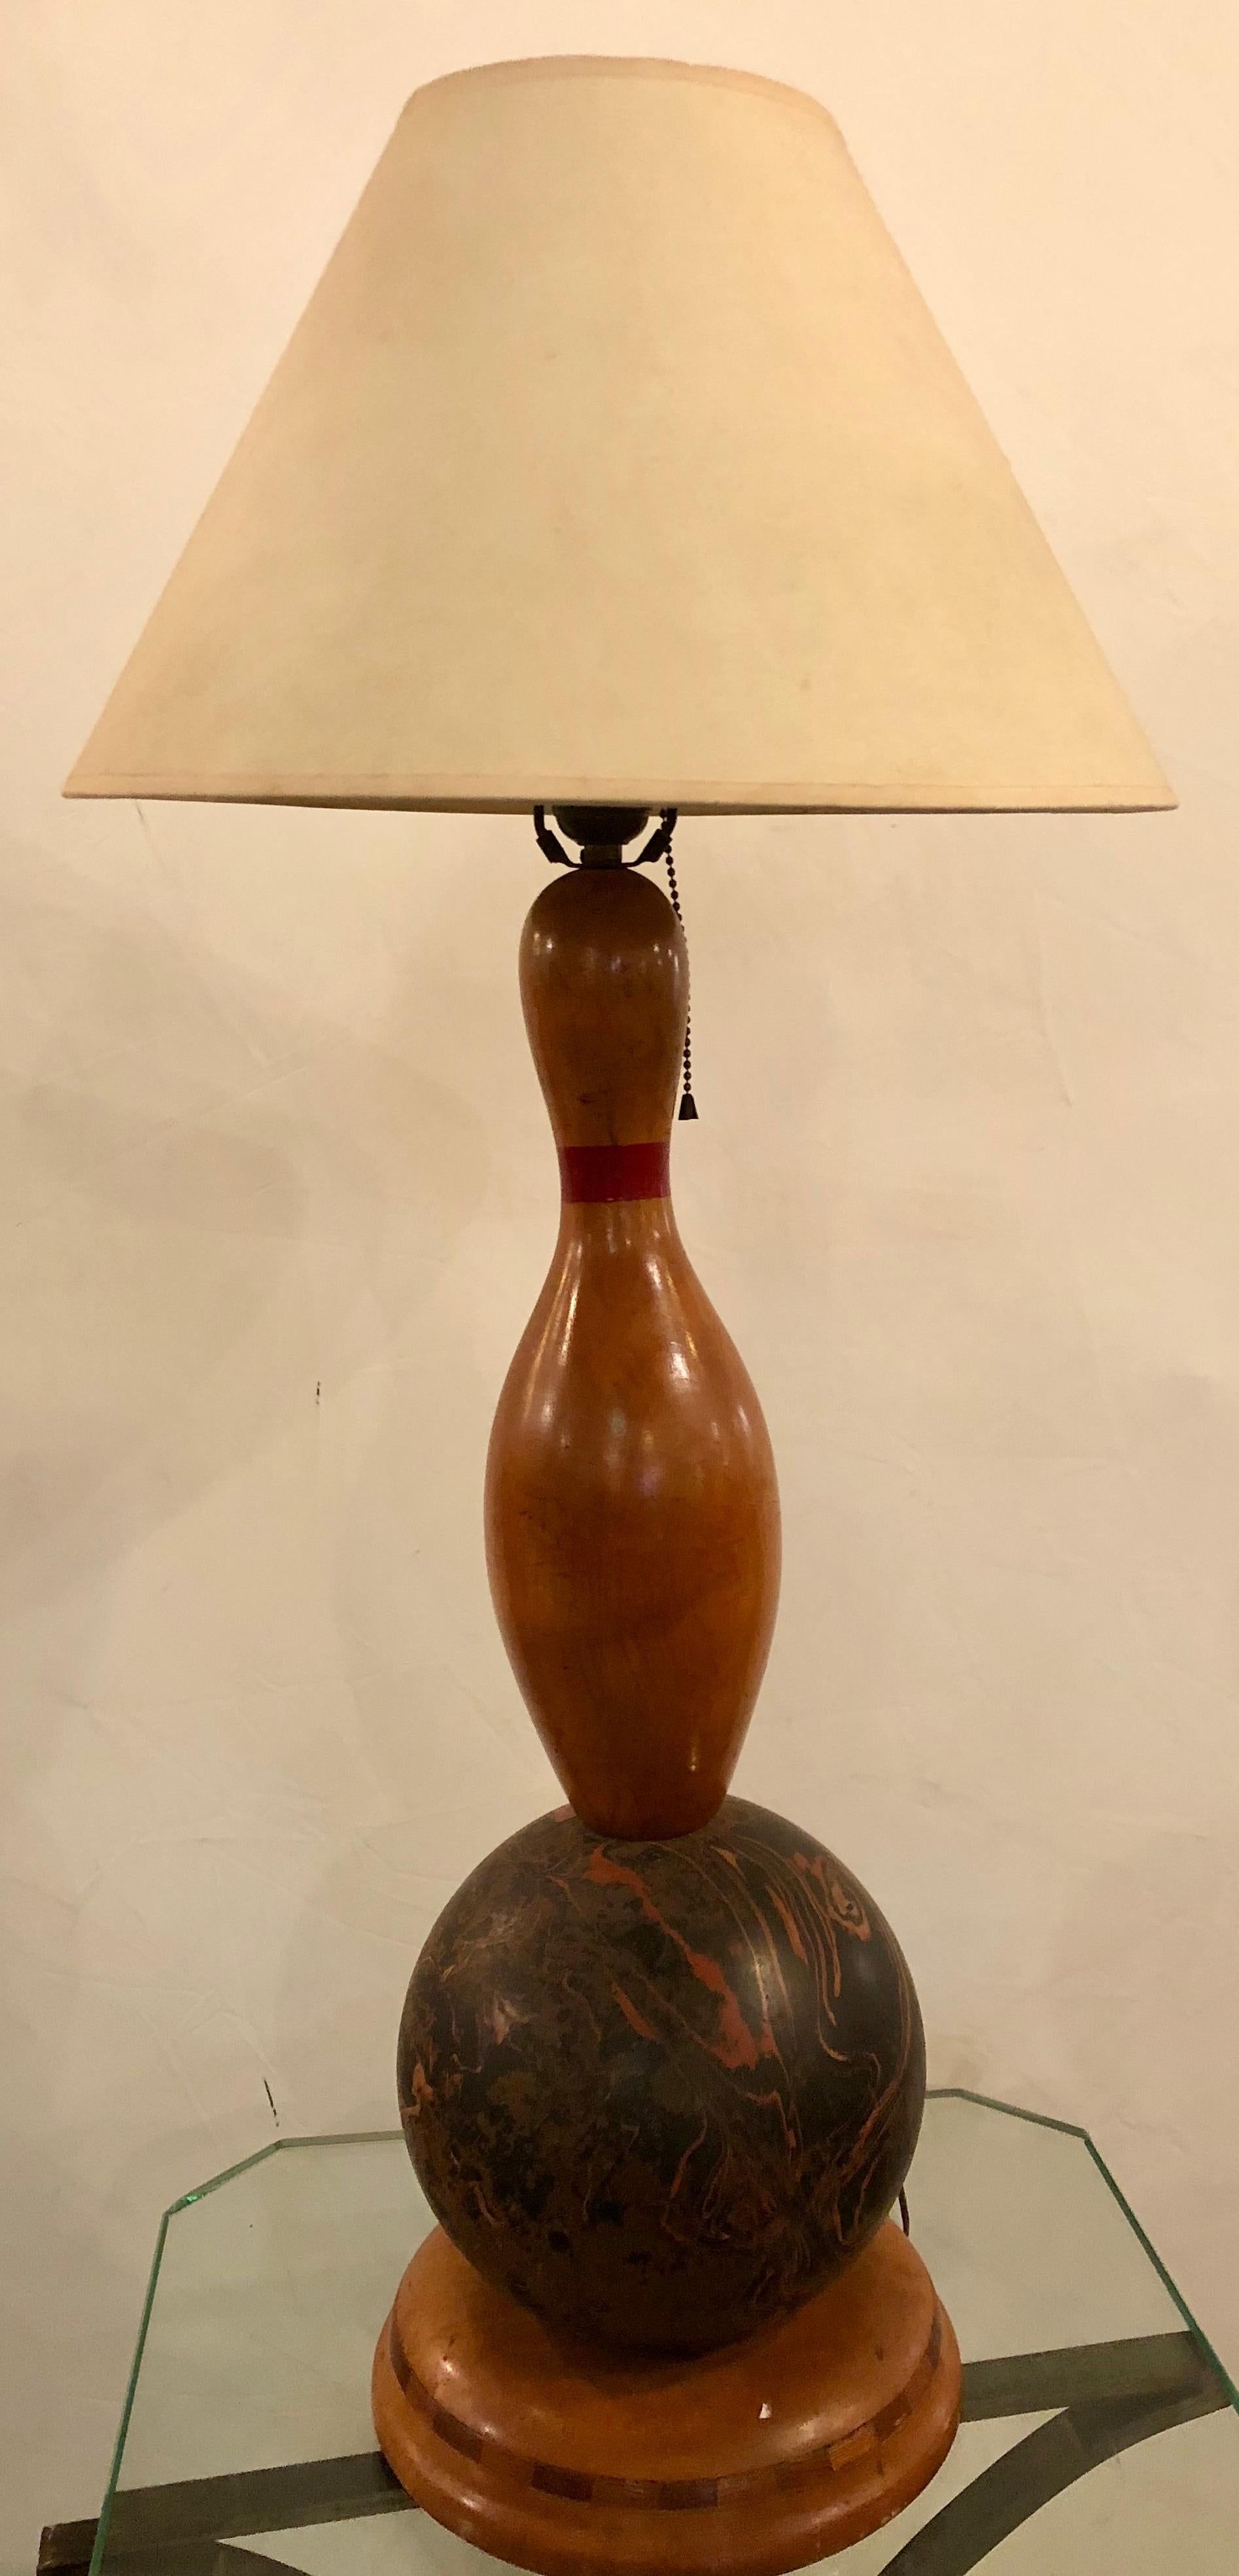 Bowling ball and pin Mid-Century Modern table lamp. An actual bowling ball and pin mounted as a decorative table lamp.